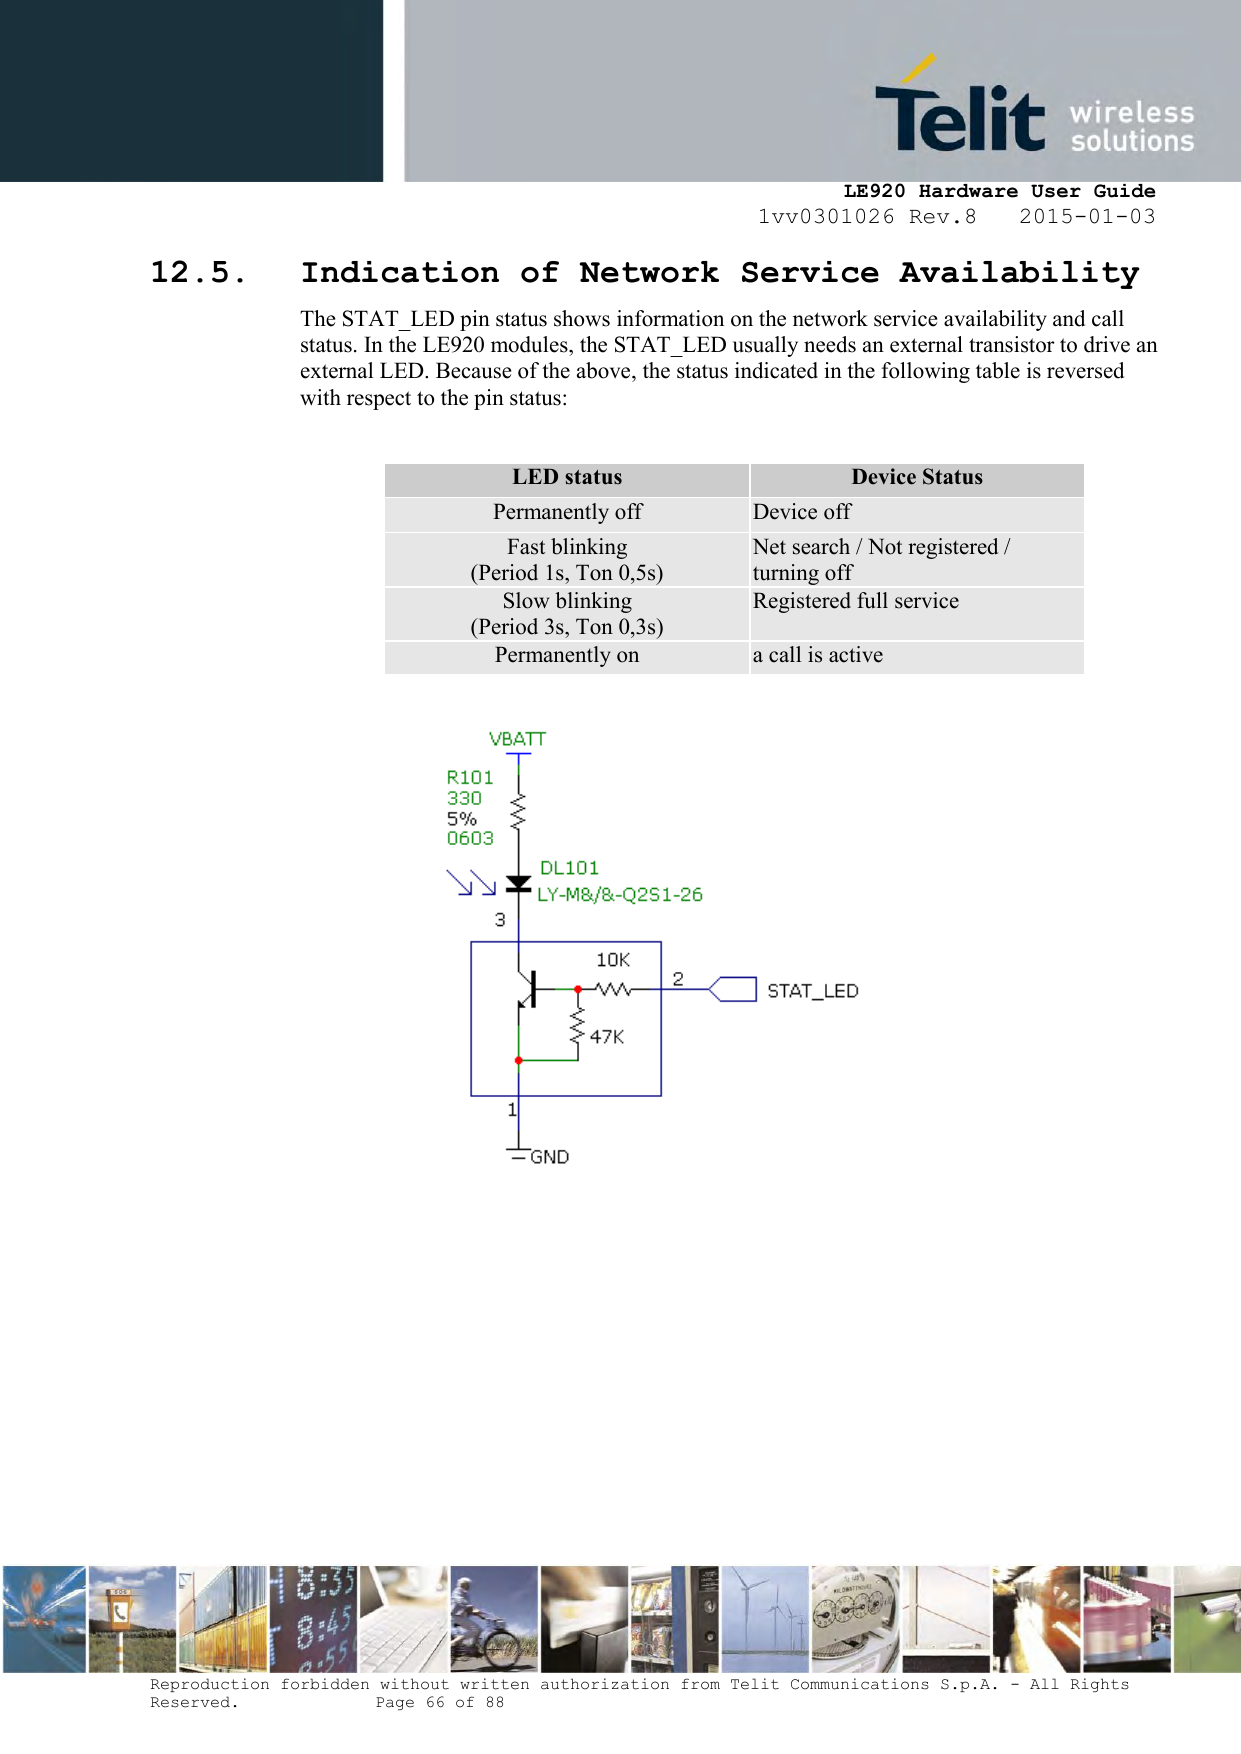     LE920 Hardware User Guide 1vv0301026 Rev.8   2015-01-03 Reproduction forbidden without written authorization from Telit Communications S.p.A. - All Rights Reserved.    Page 66 of 88  12.5. Indication of Network Service Availability The STAT_LED pin status shows information on the network service availability and call status. In the LE920 modules, the STAT_LED usually needs an external transistor to drive an external LED. Because of the above, the status indicated in the following table is reversed with respect to the pin status:  LED status Device Status Permanently off Device off Fast blinking (Period 1s, Ton 0,5s) Net search / Not registered / turning off Slow blinking (Period 3s, Ton 0,3s) Registered full service Permanently on a call is active           